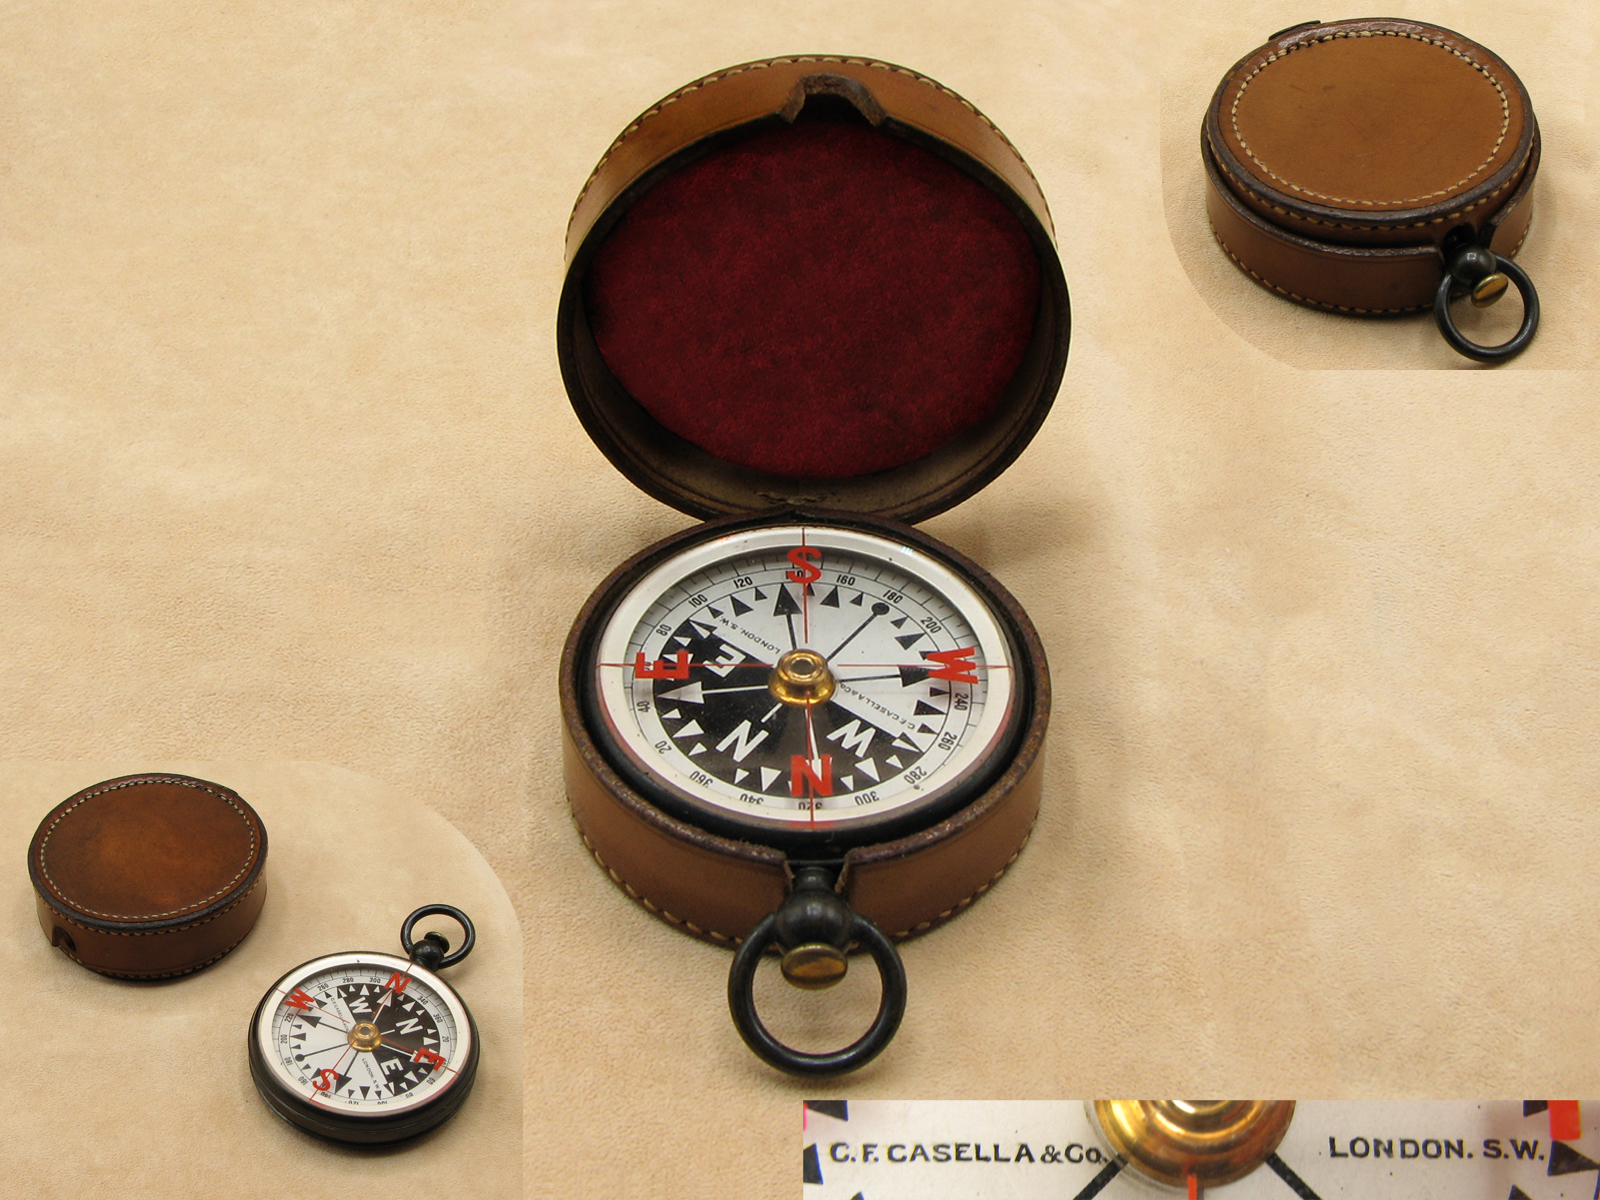 Casella Edwardian pocket compass in leather case circa 1910 